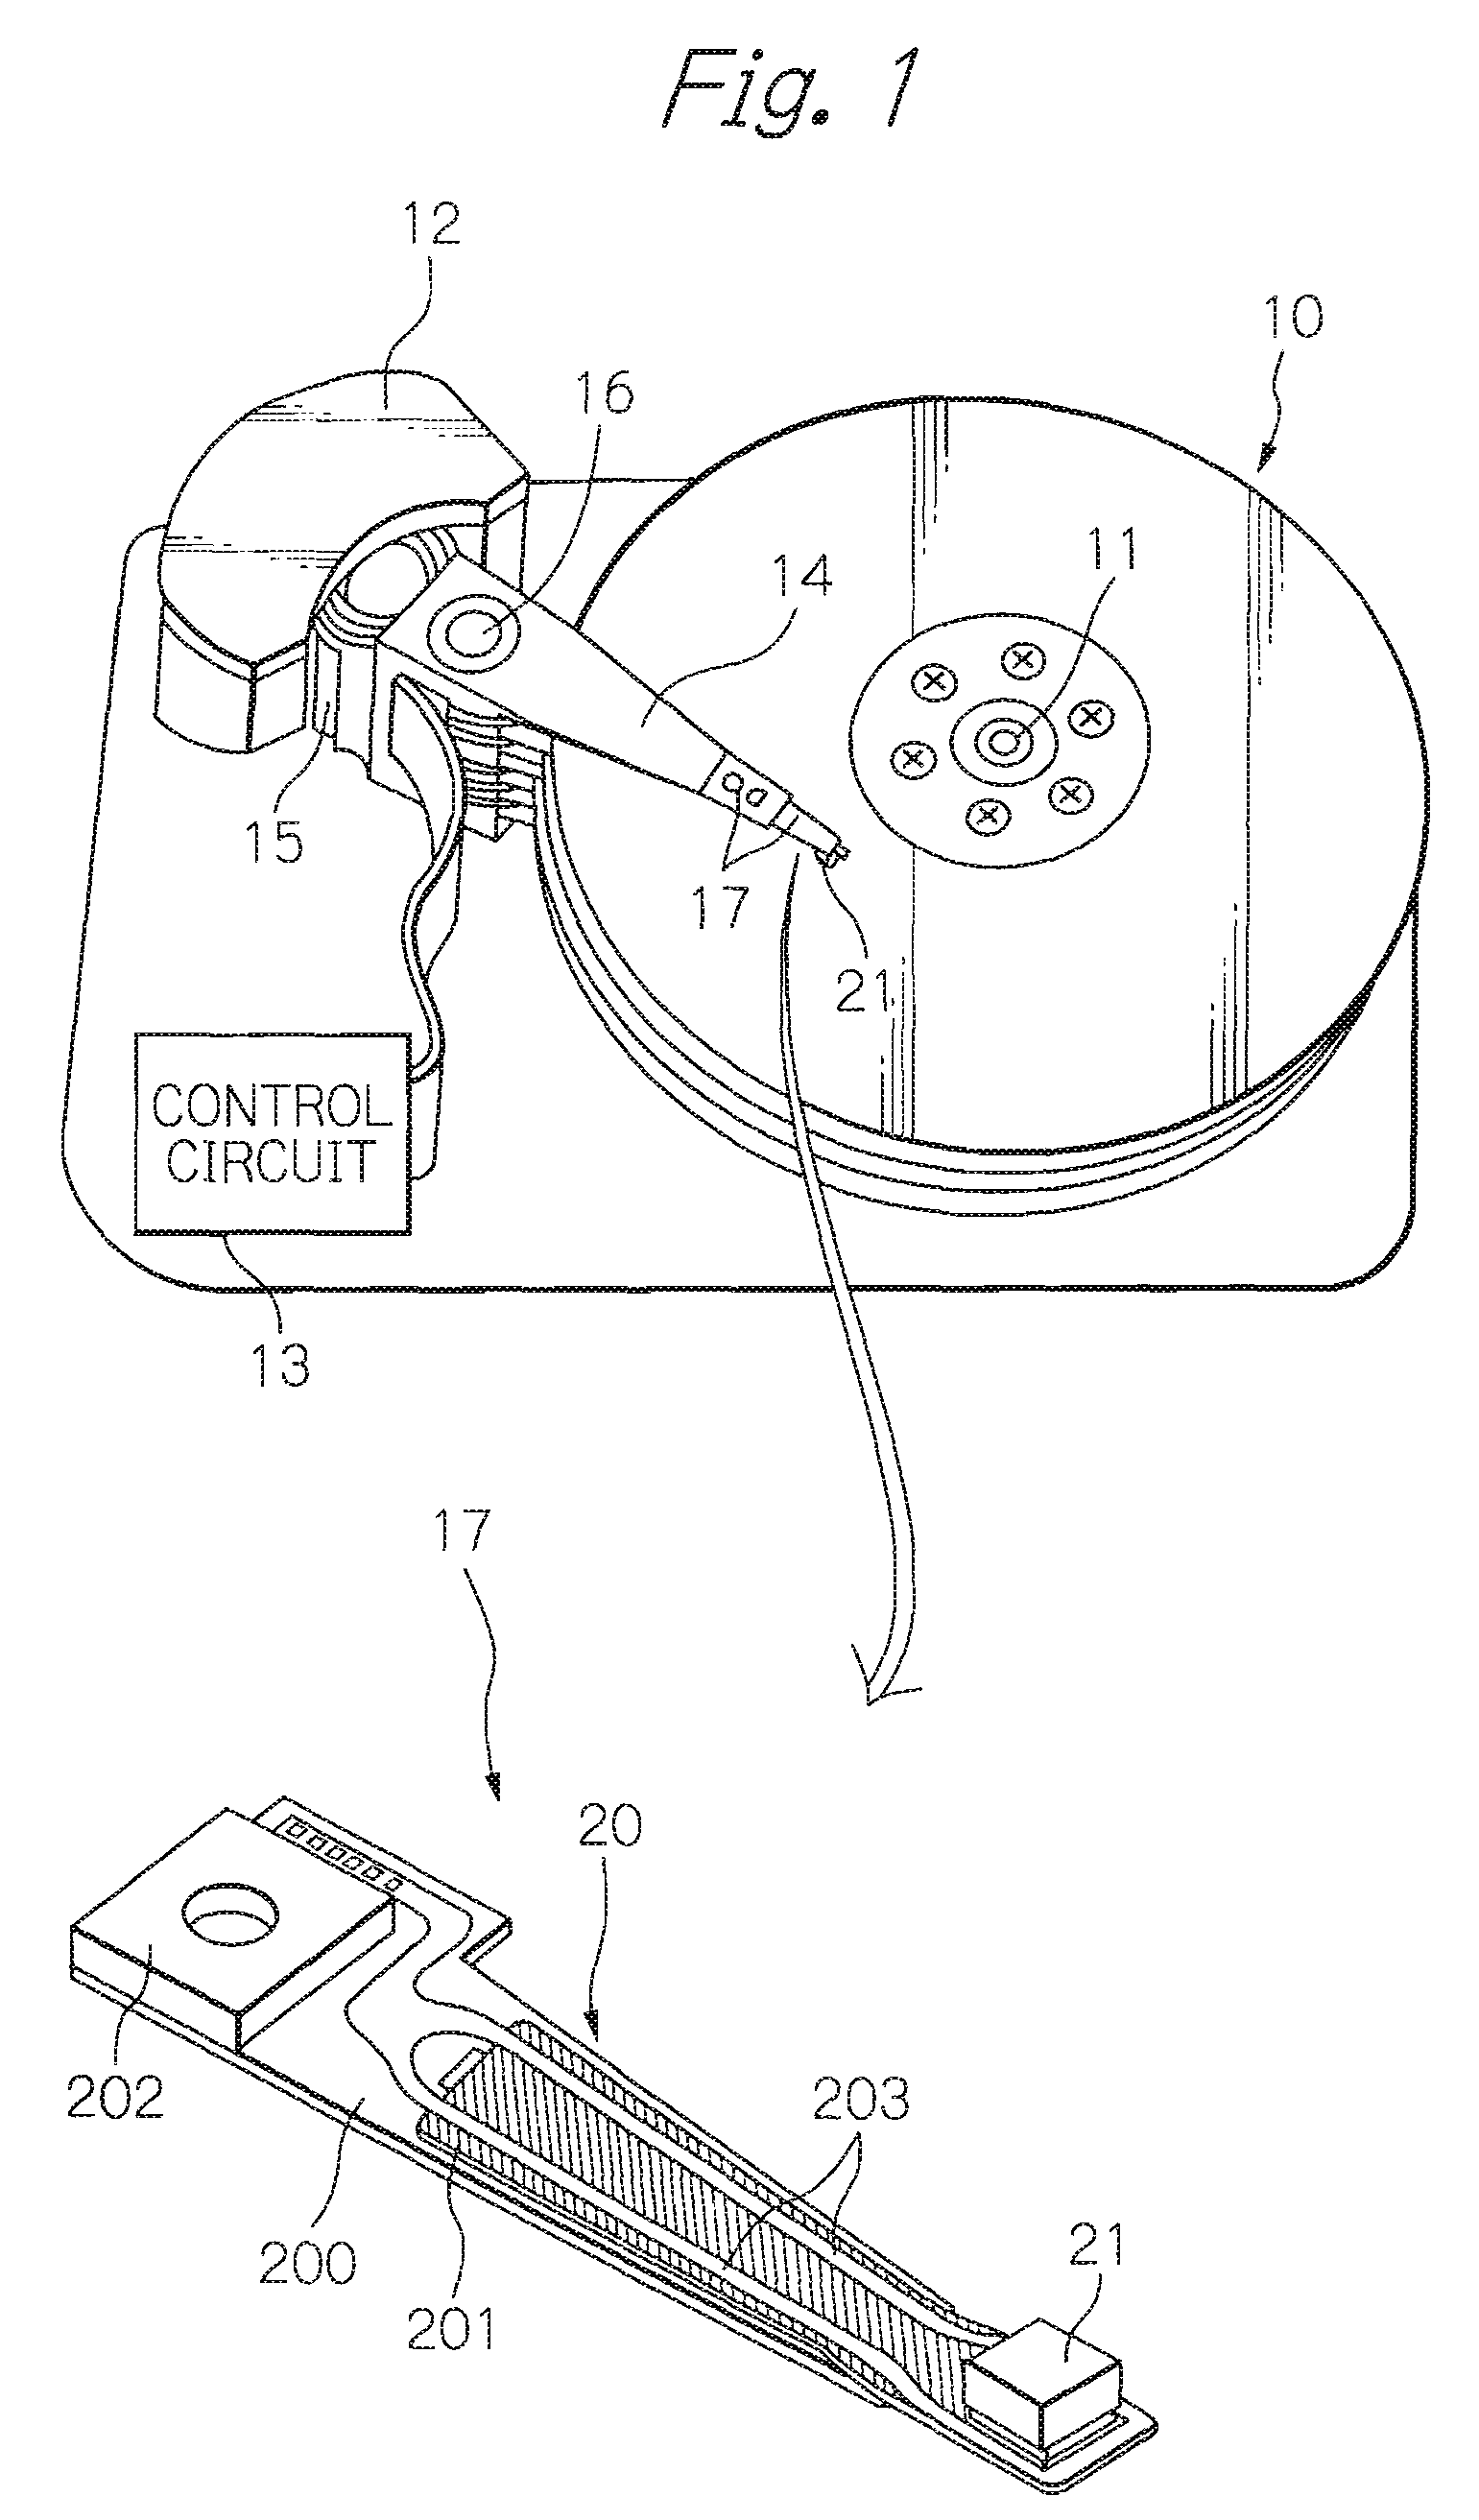 Magnetic reproducing method for suppressing low temperature noise